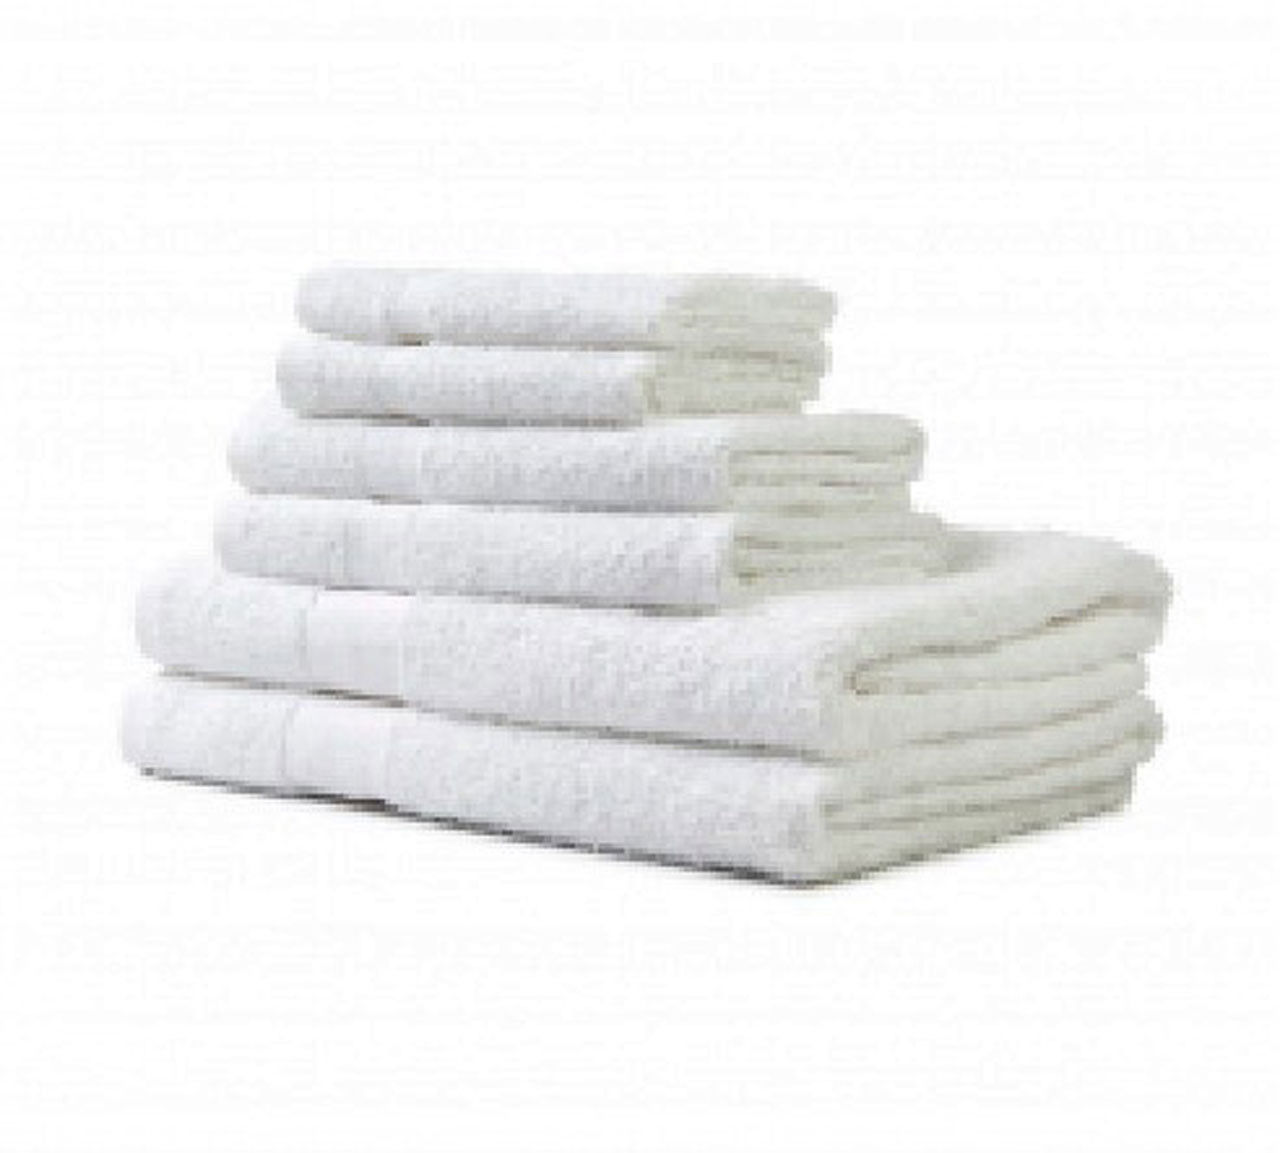 How can you tell if a bath towel is high quality?